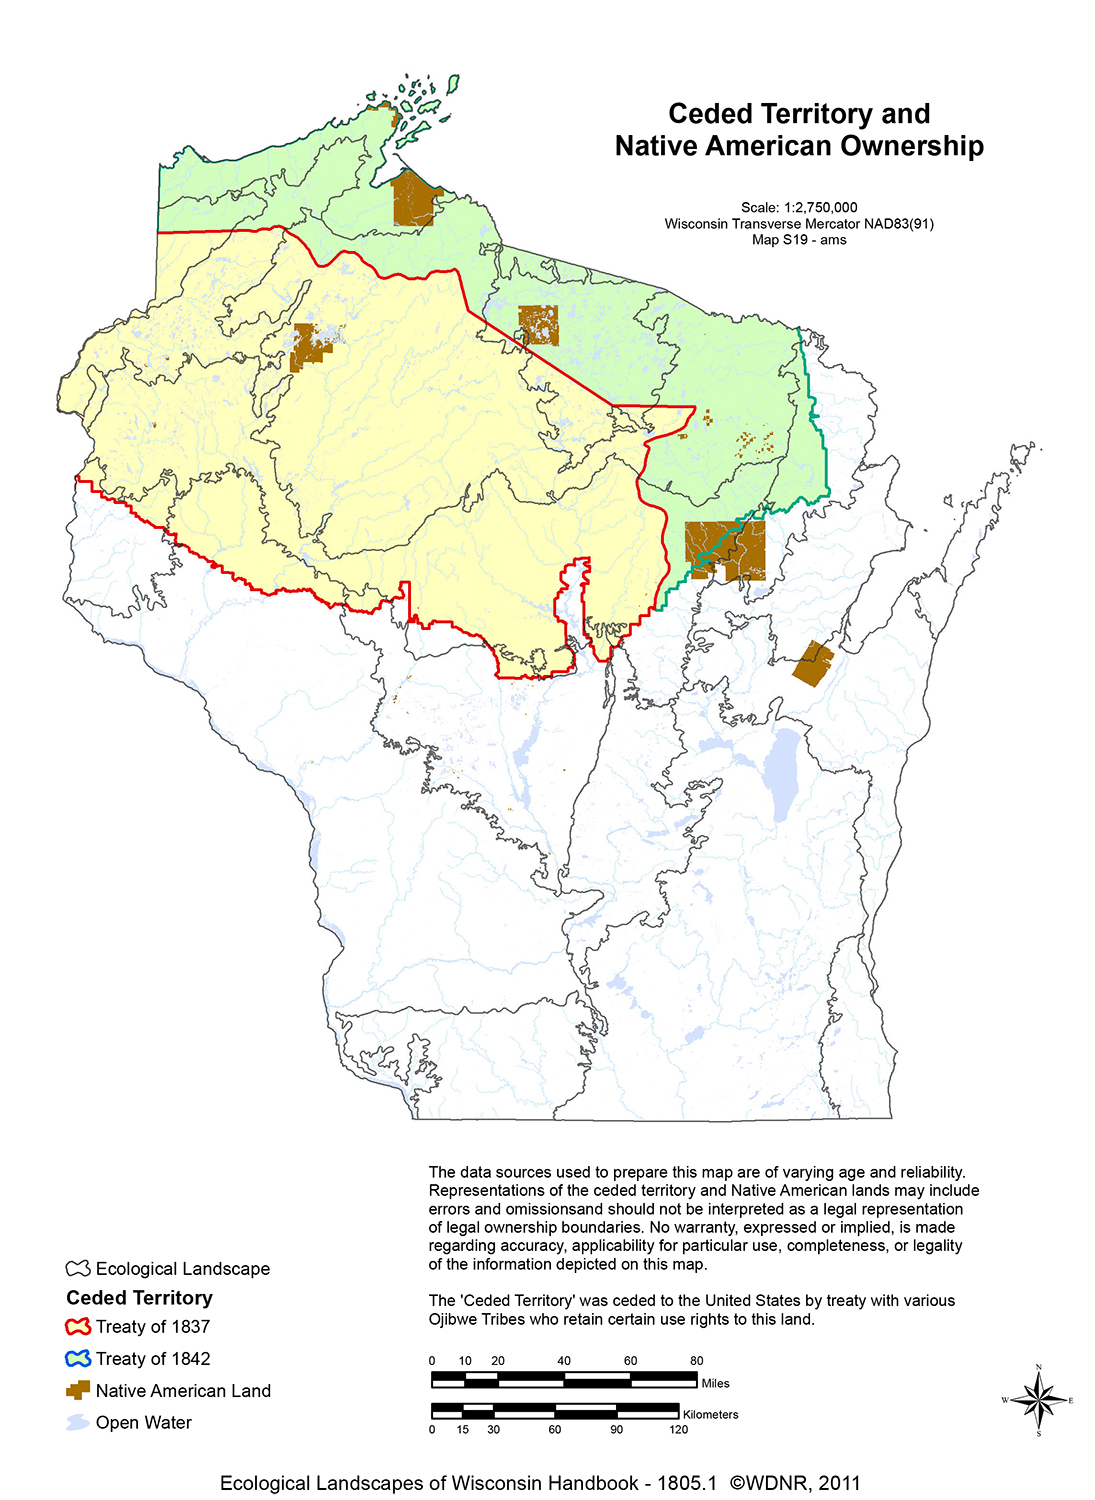 A map of ceded territory and Native American lands in northern Wisconsin